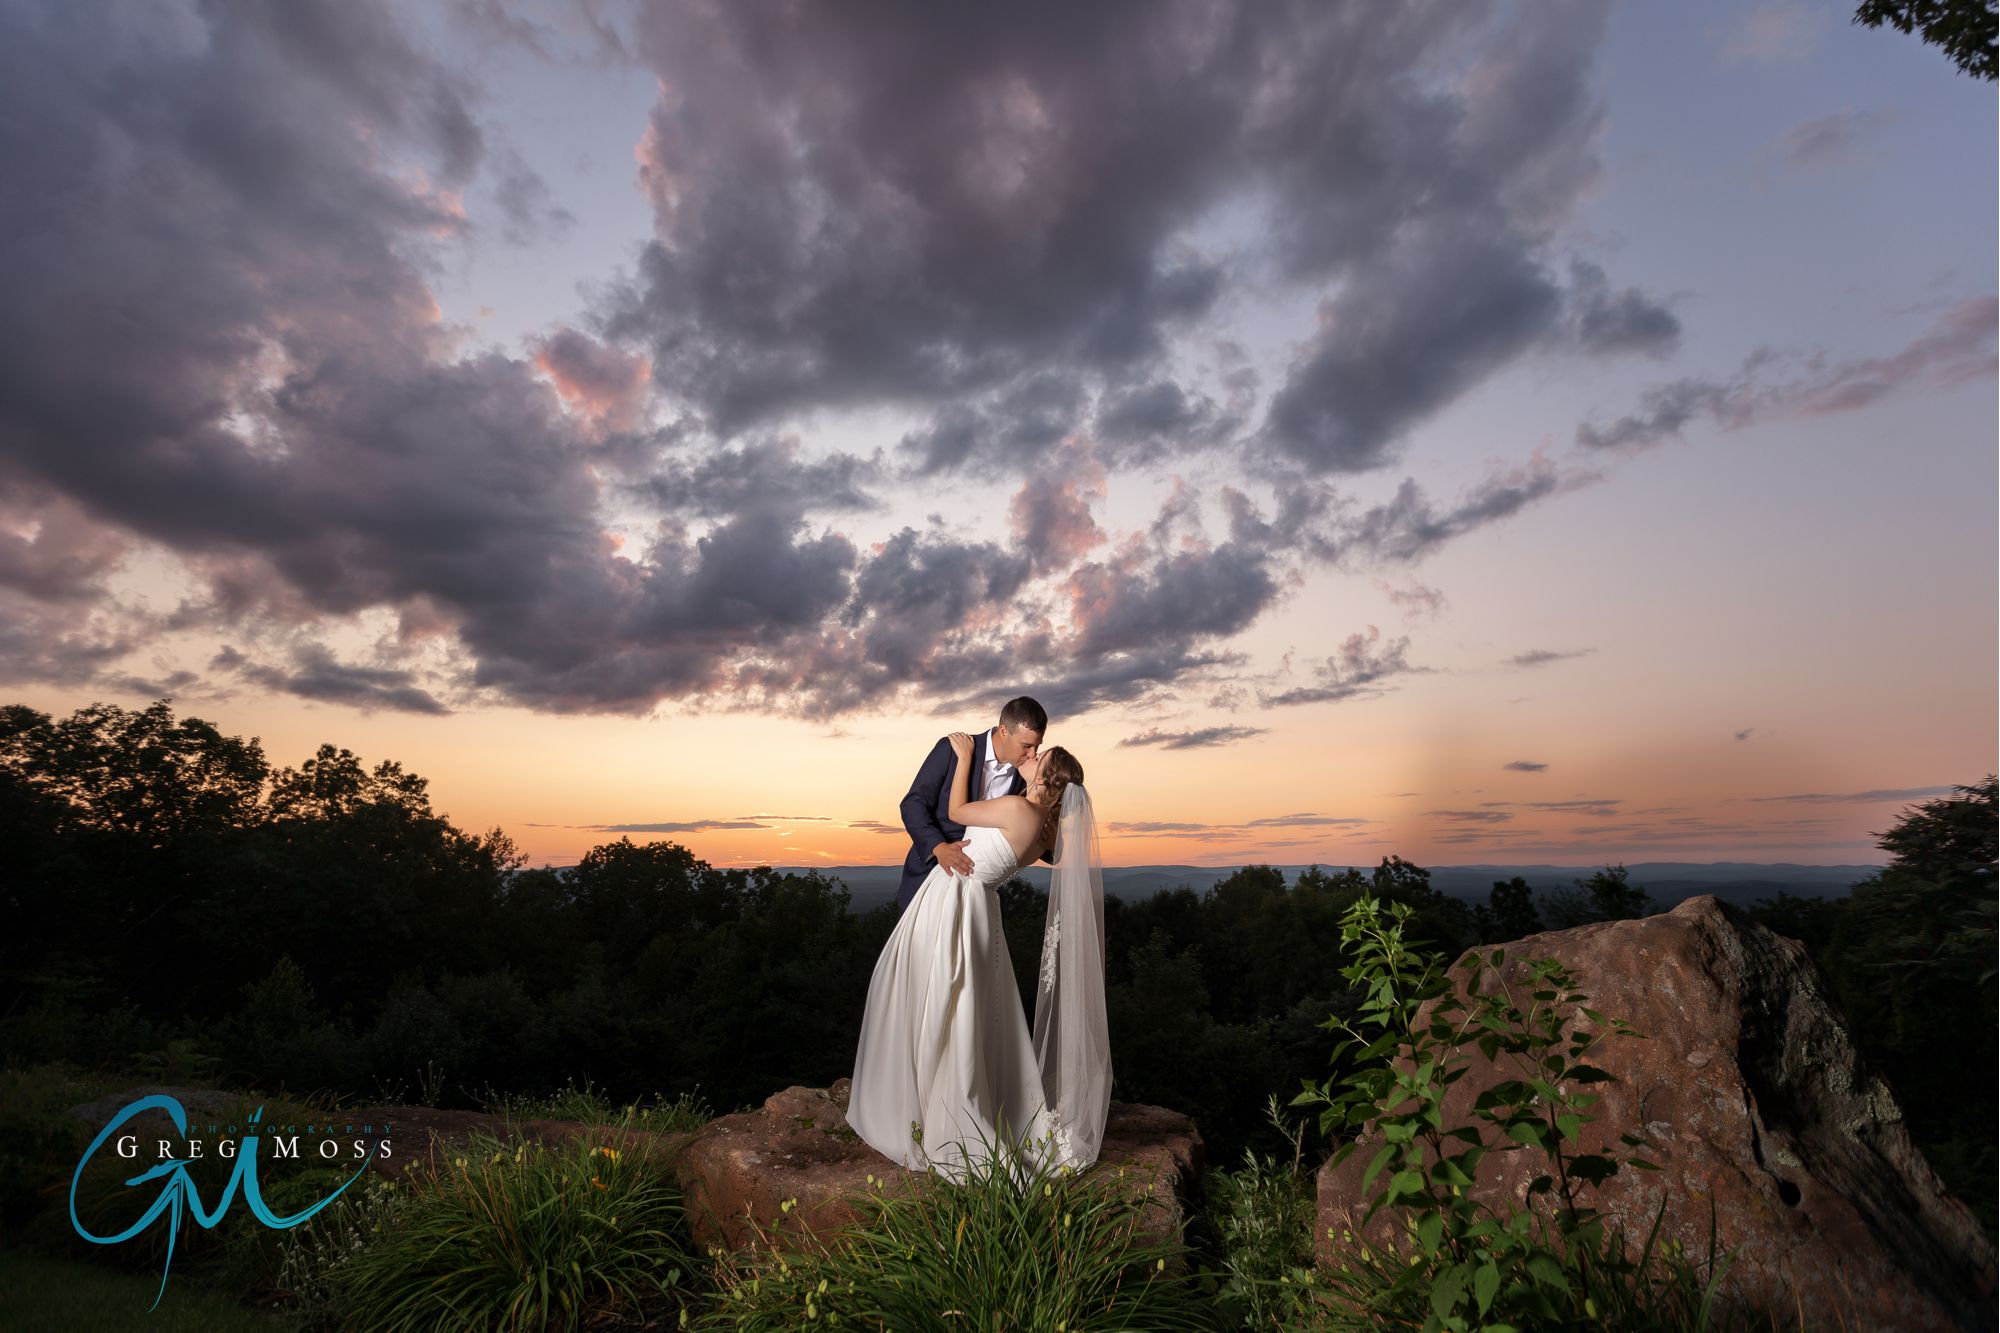 A bride and groom embracing on a rocky overlook with a vibrant sunset and dramatic clouds in the background, perfectly timed for optimal photography.